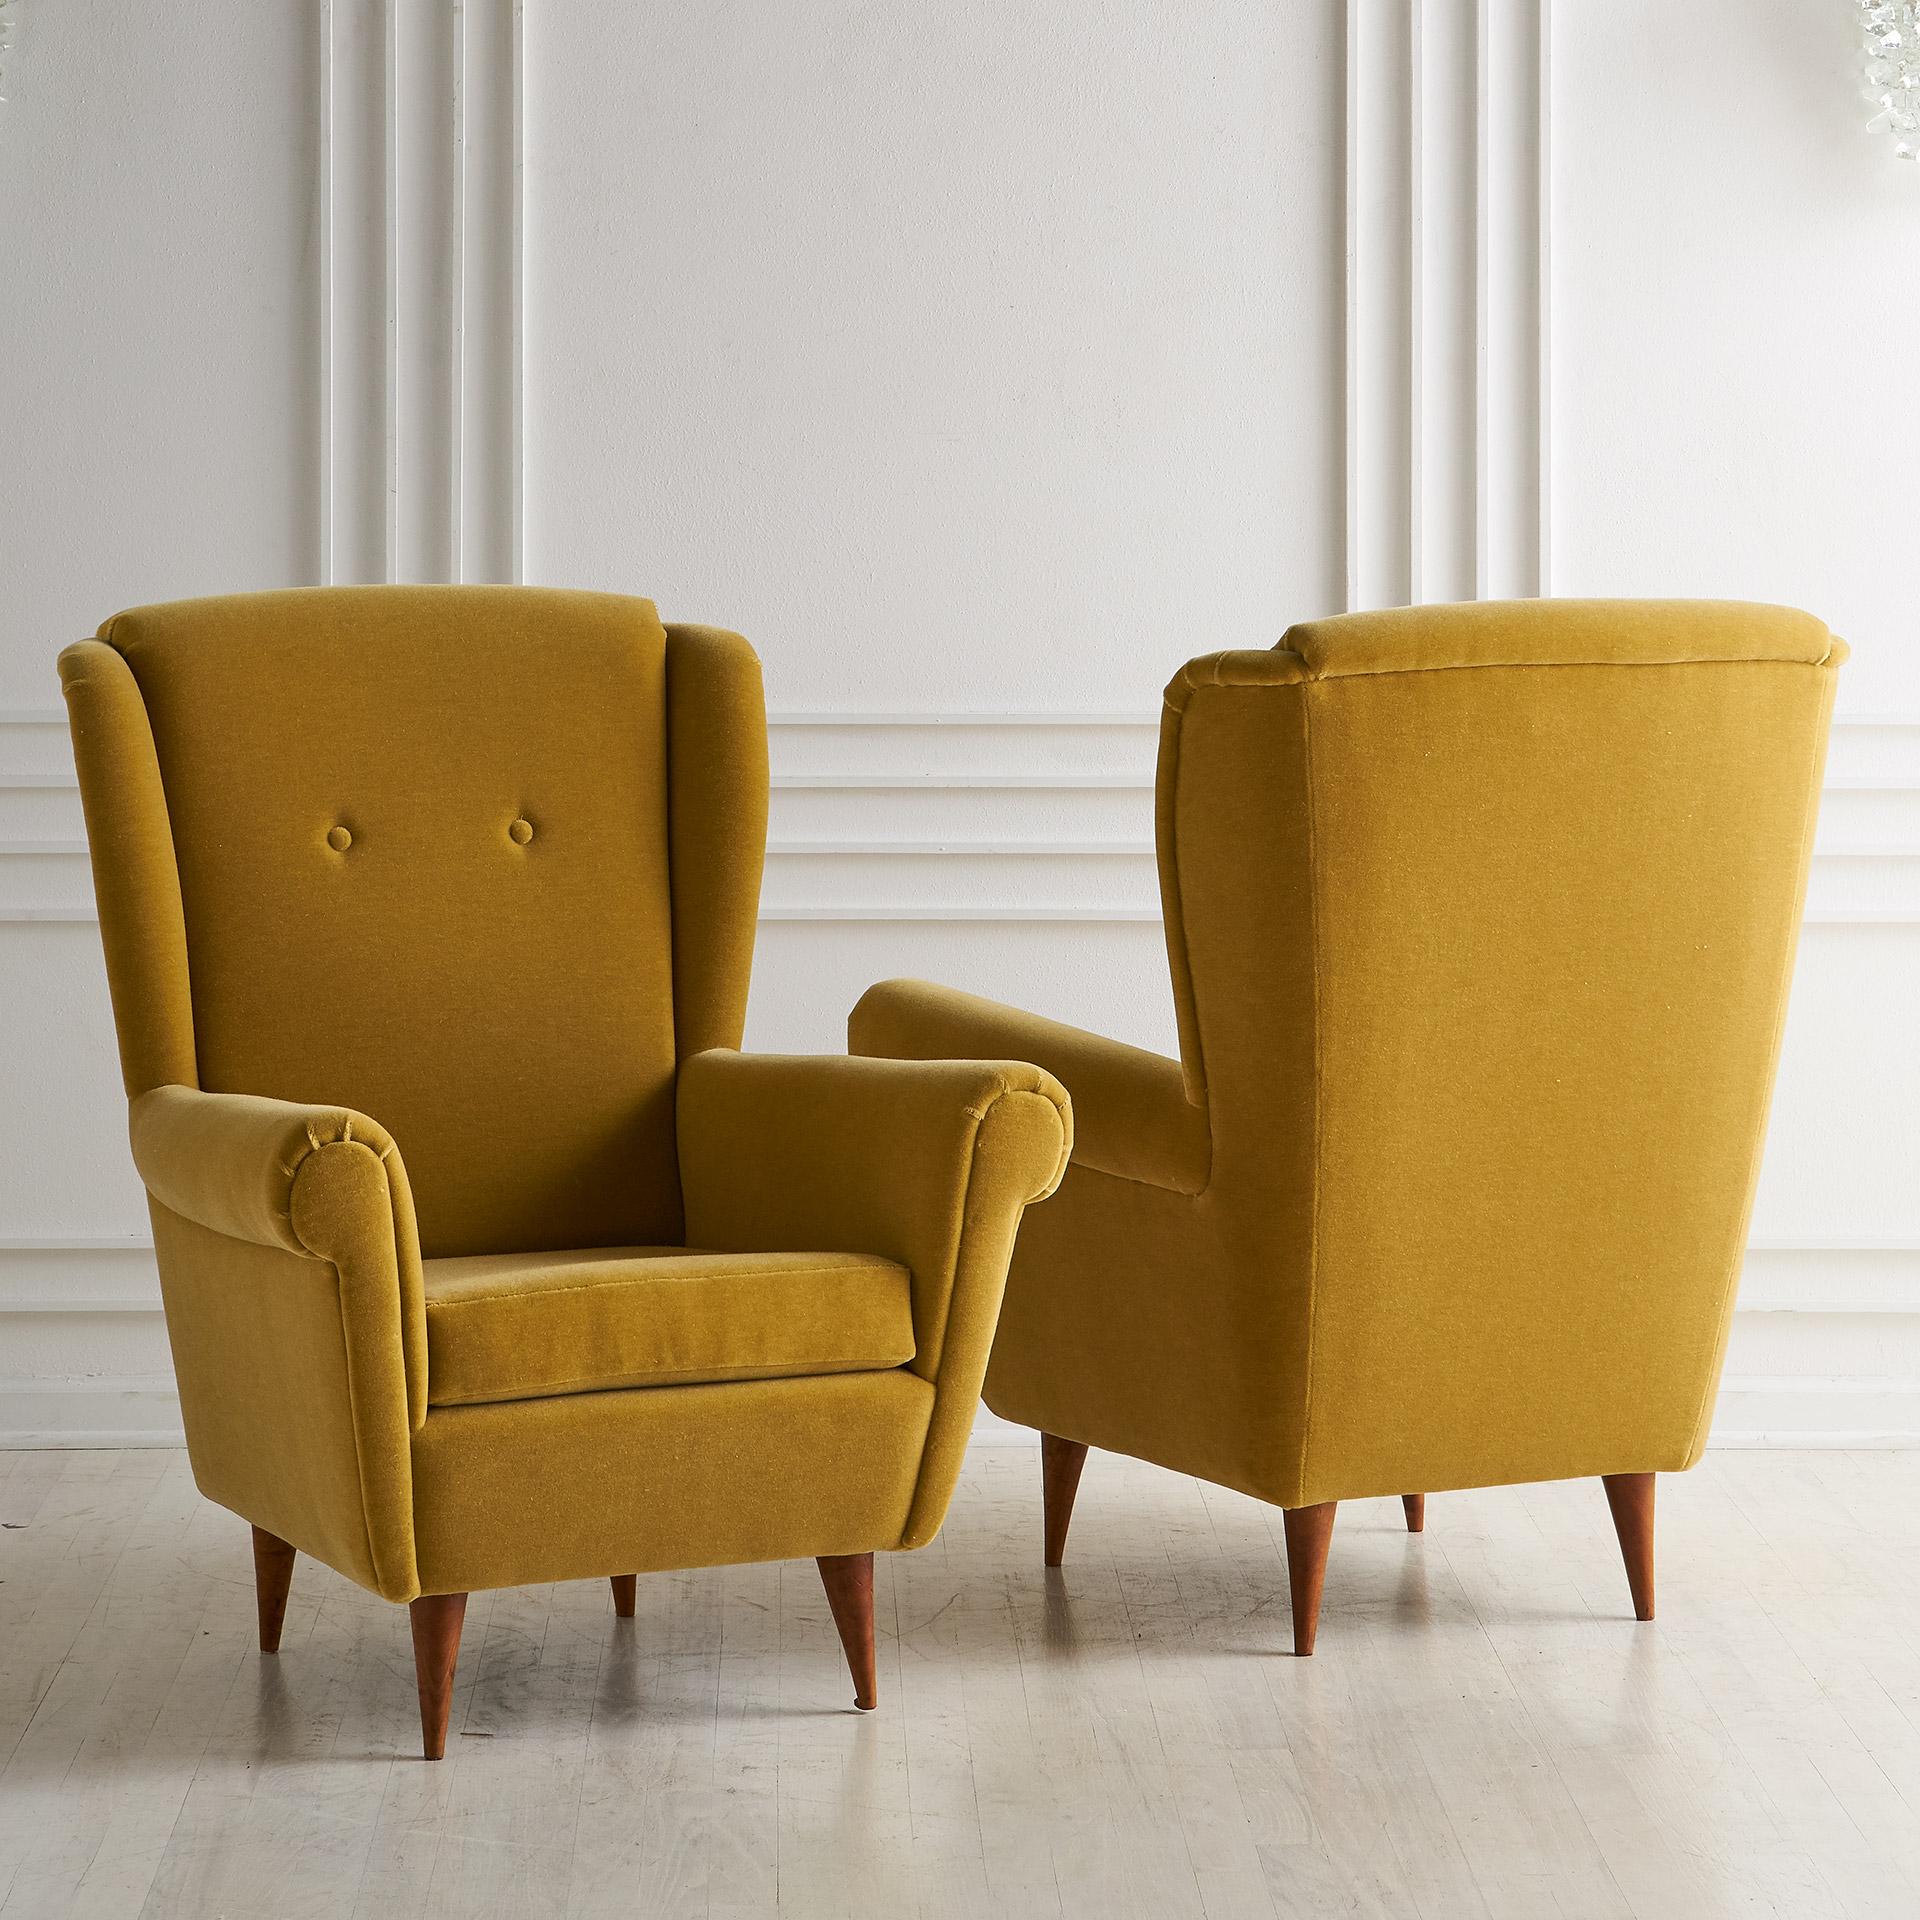 A handsome pair of midcentury Italian wingback chairs newly upholstered in a mustard yellow mohair with tapered wood legs.